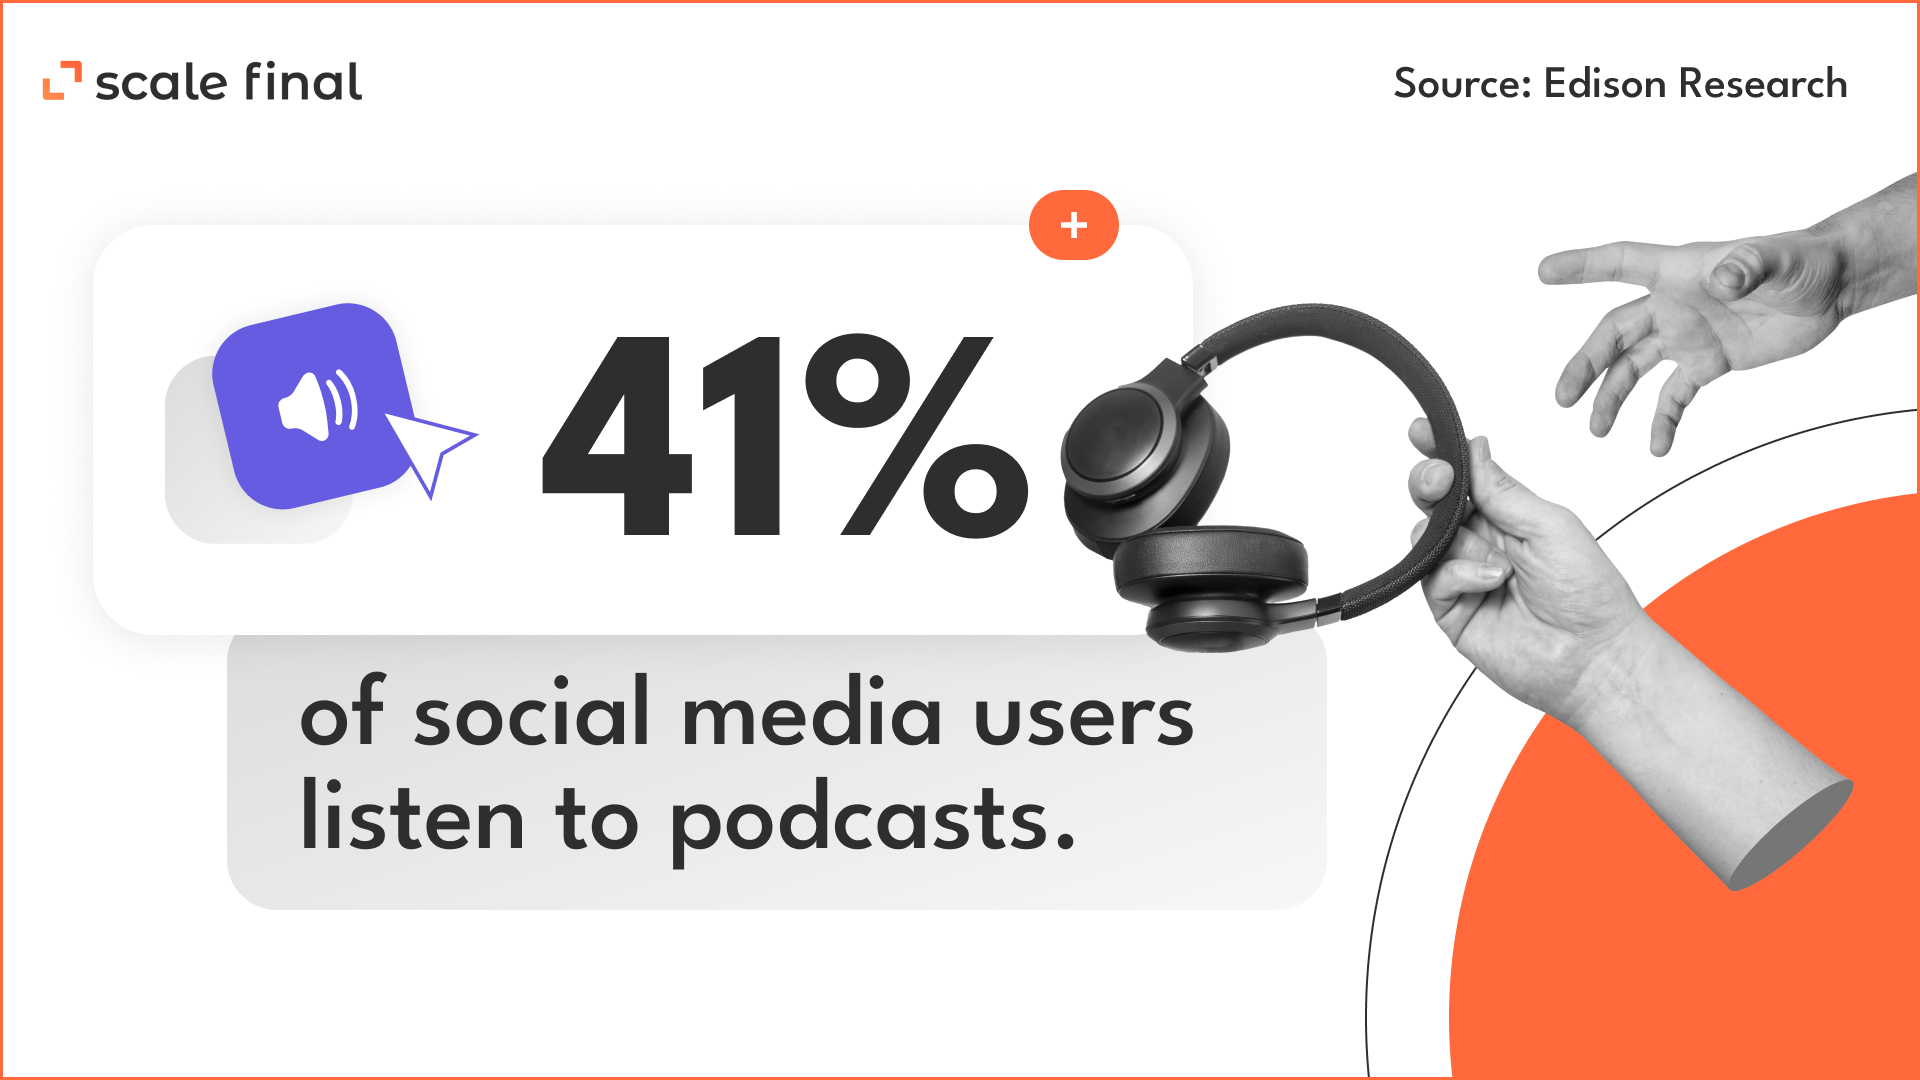 41% of social media users listen to podcasts.
Source: Edison Research